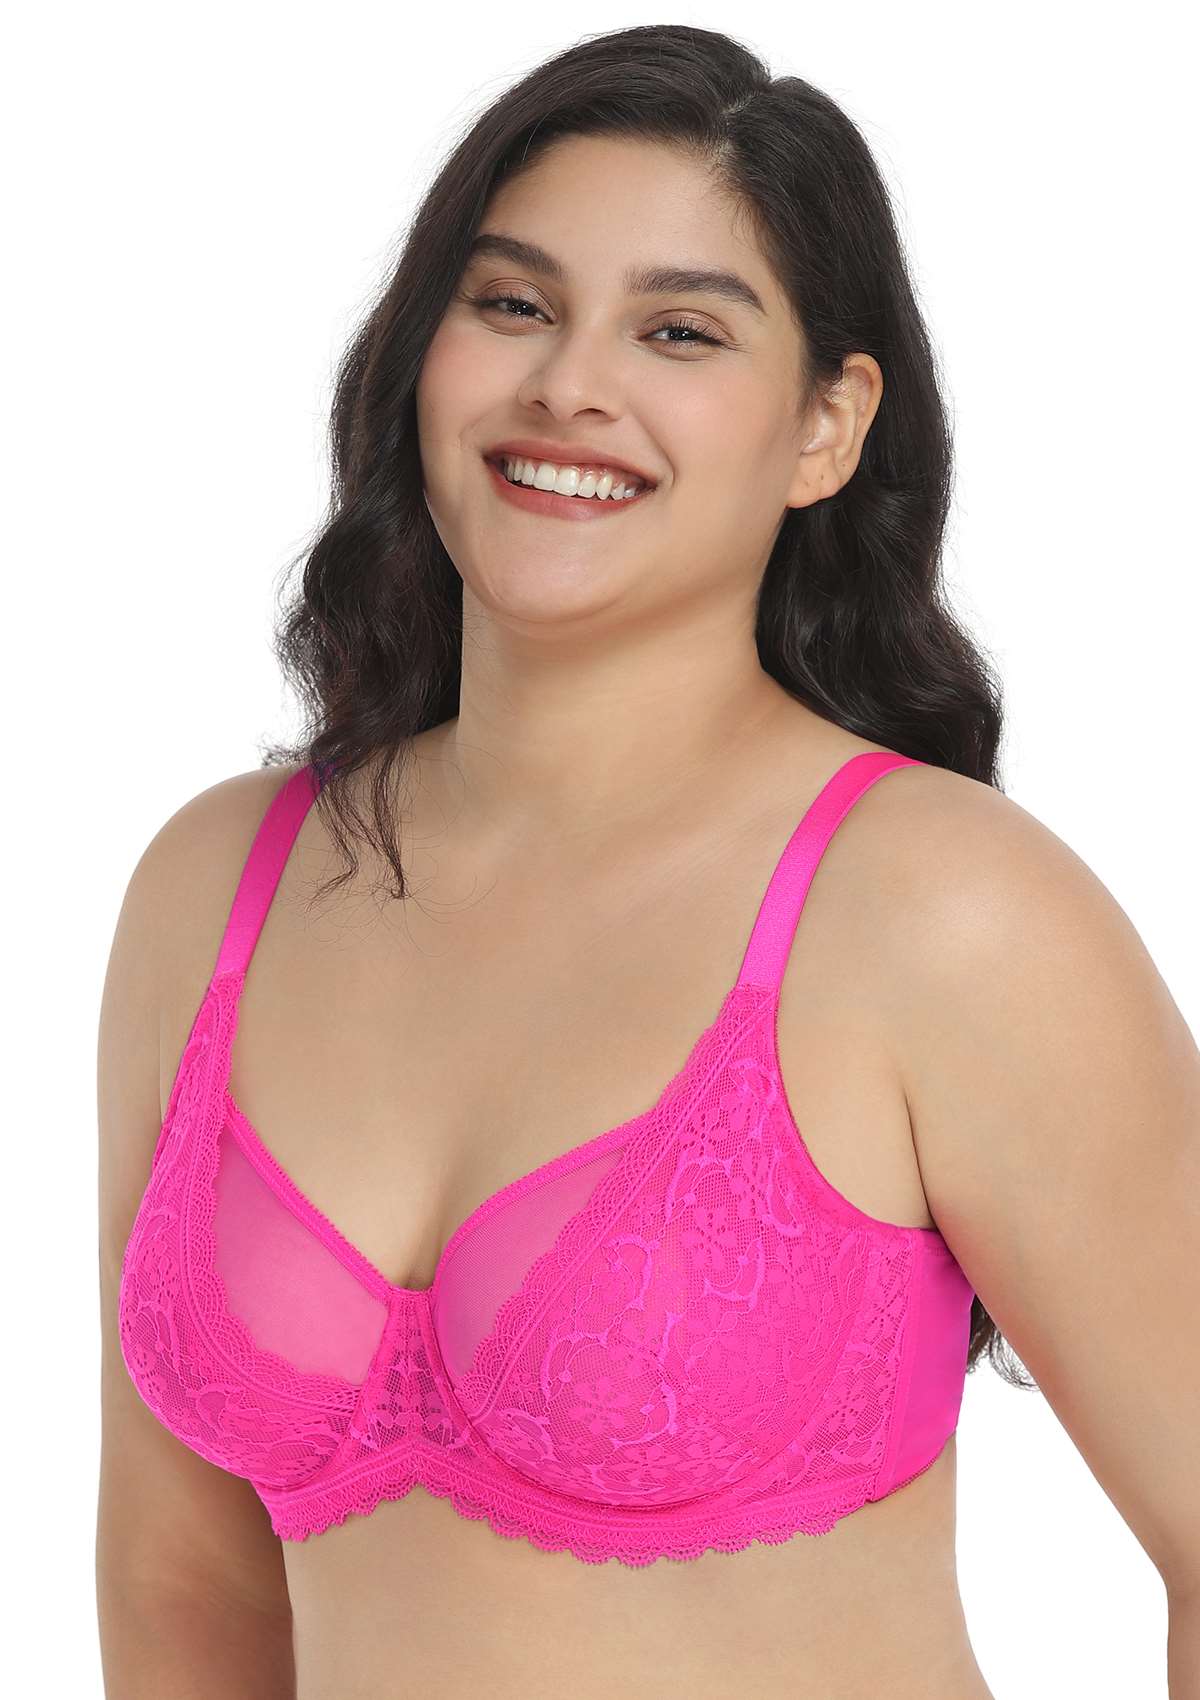 HSIA Anemone Lace Unlined Bra: Supportive, Lightweight Bra - Ginger / 34 / DD/E